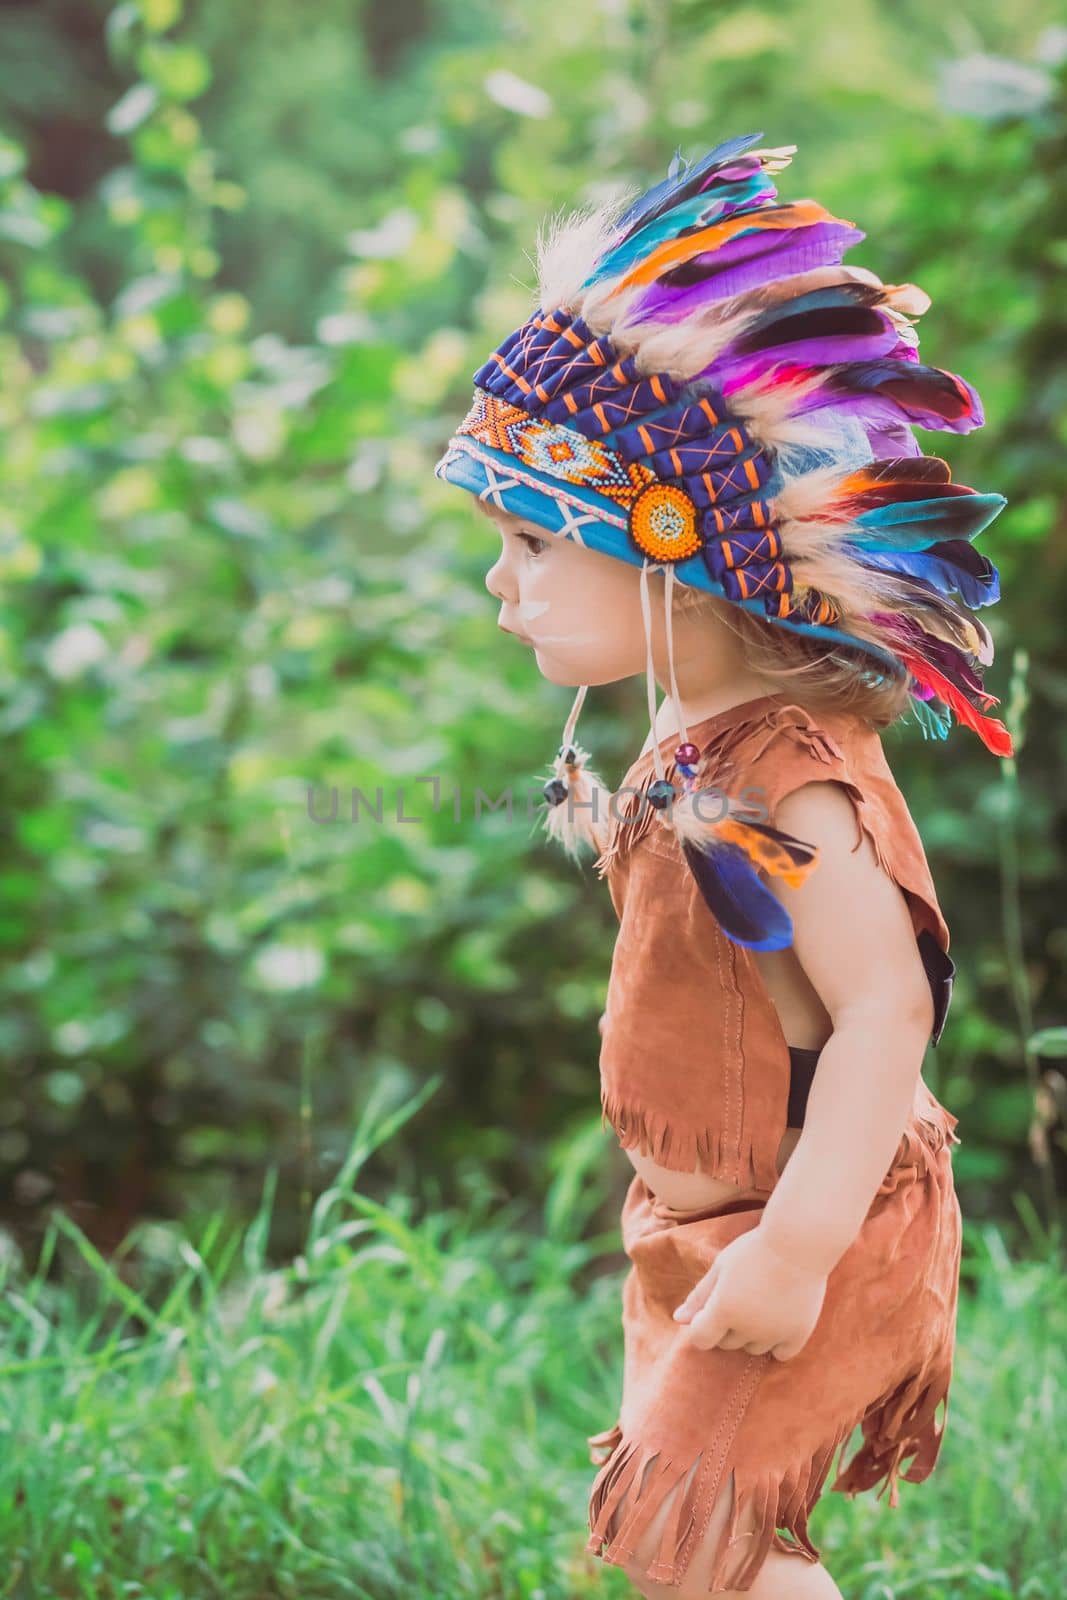 charming baby dressed in traditional American clothing.